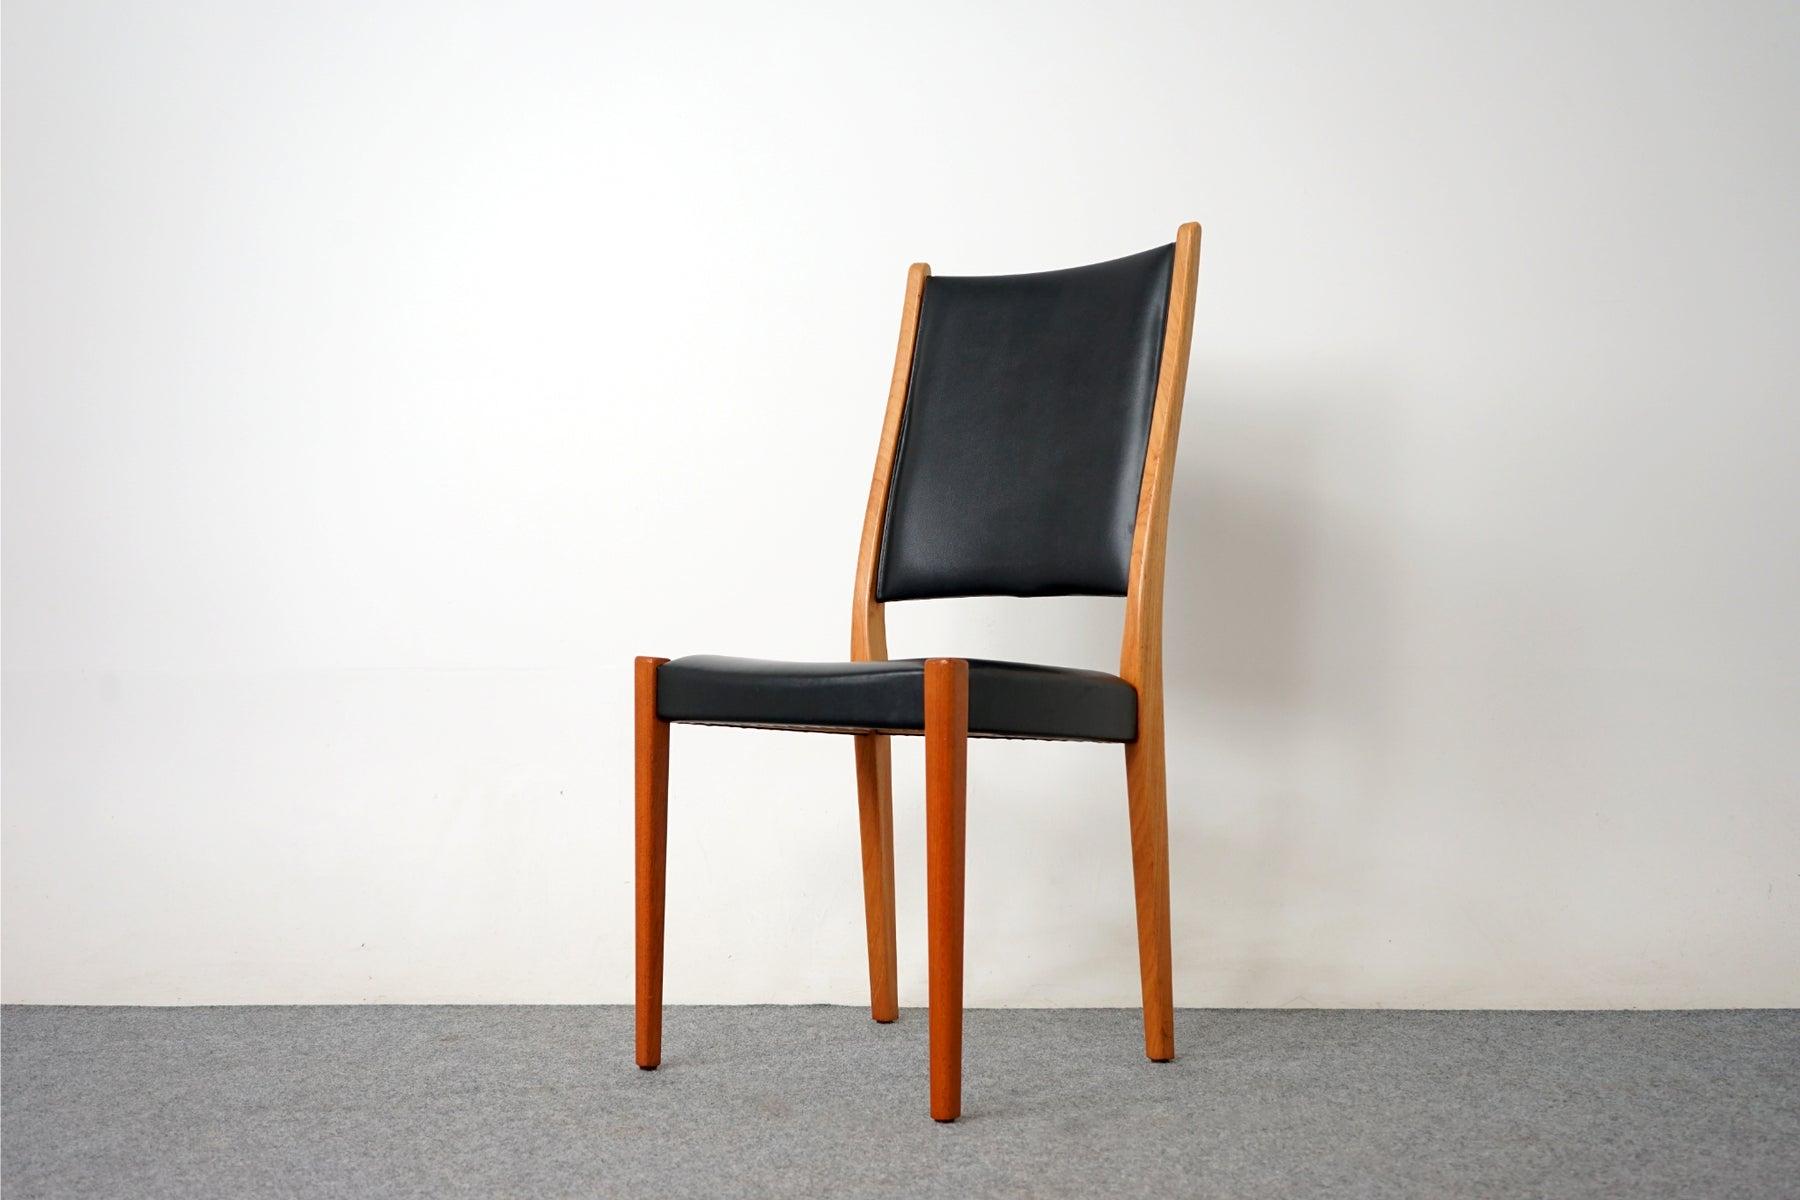 Teak dining chairs, by Svegards Markaryd, circa 1970's. Beautifully curved backrests and generous seat design provide support and comfort. Solid wood legs feature bolt for easy tightening. Clean modern lines will work well with many styles.

Wood